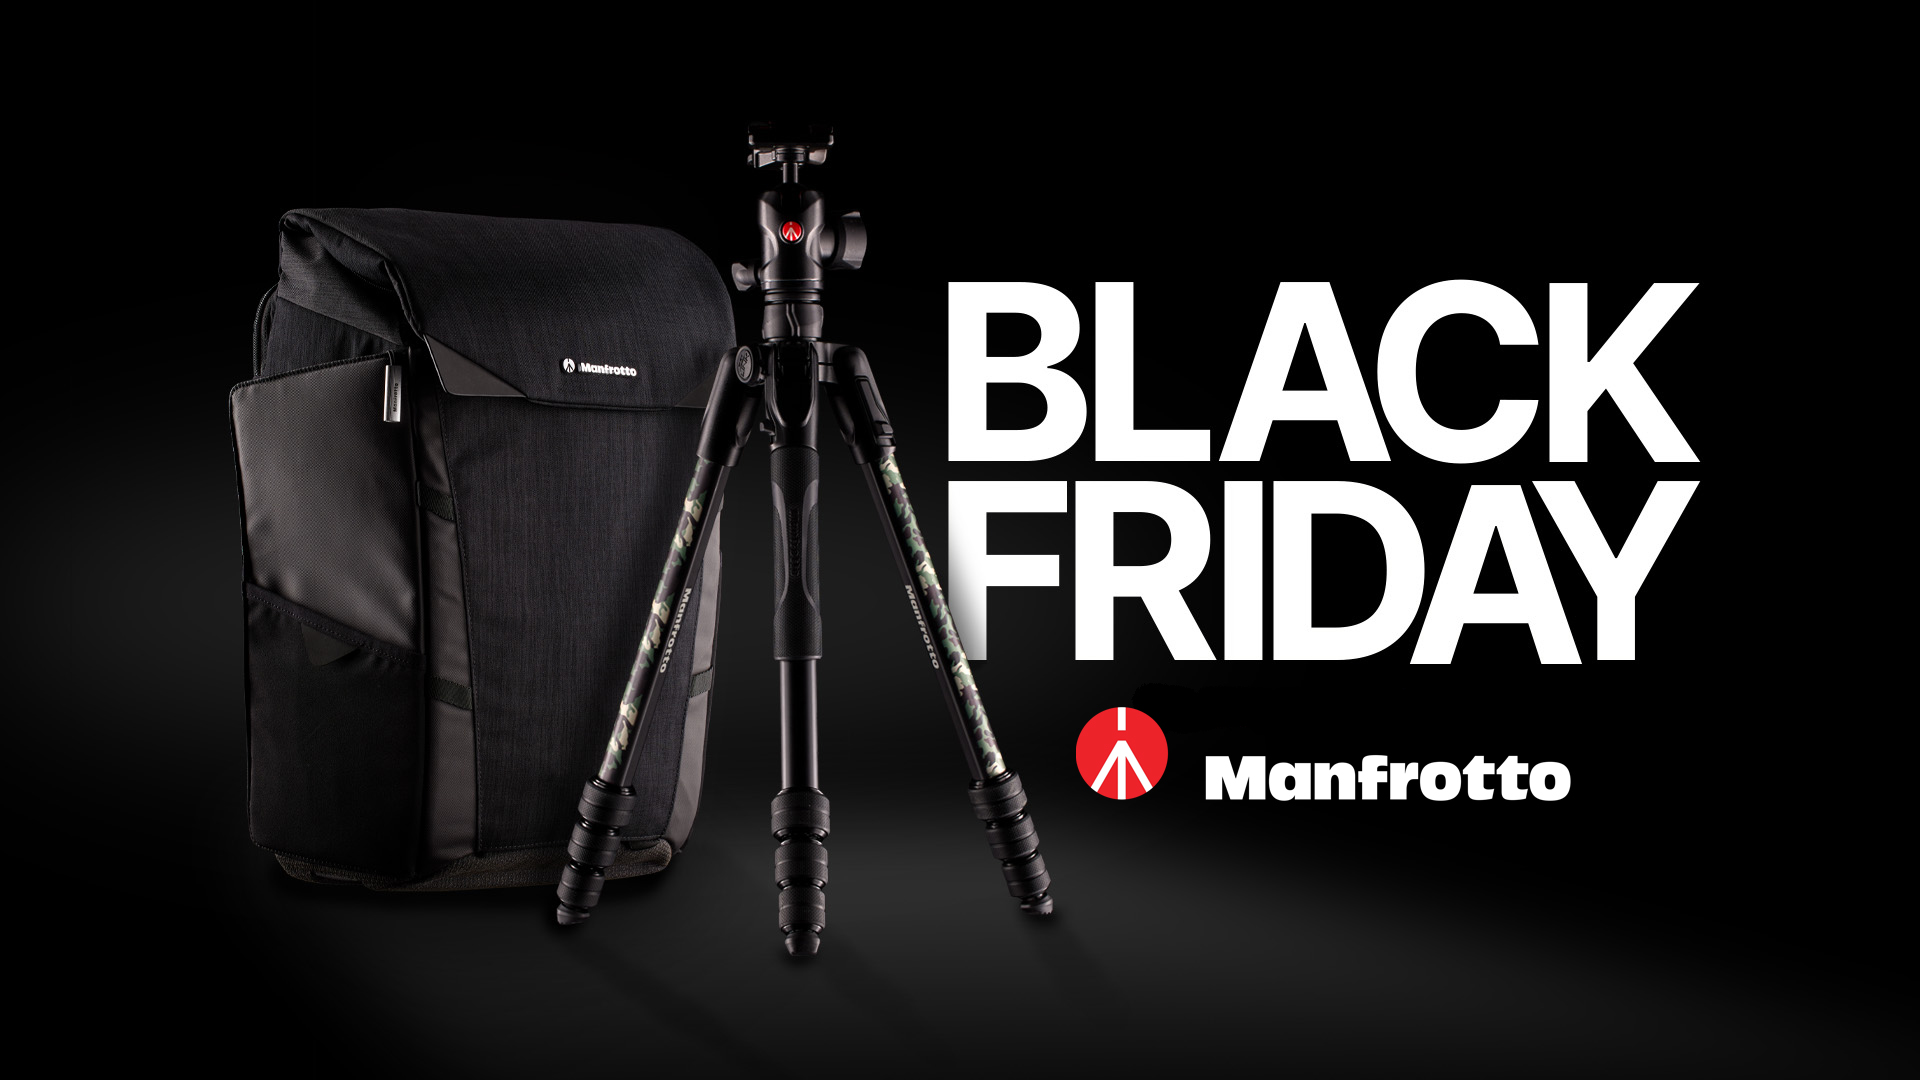 Manfrotto Black Friday